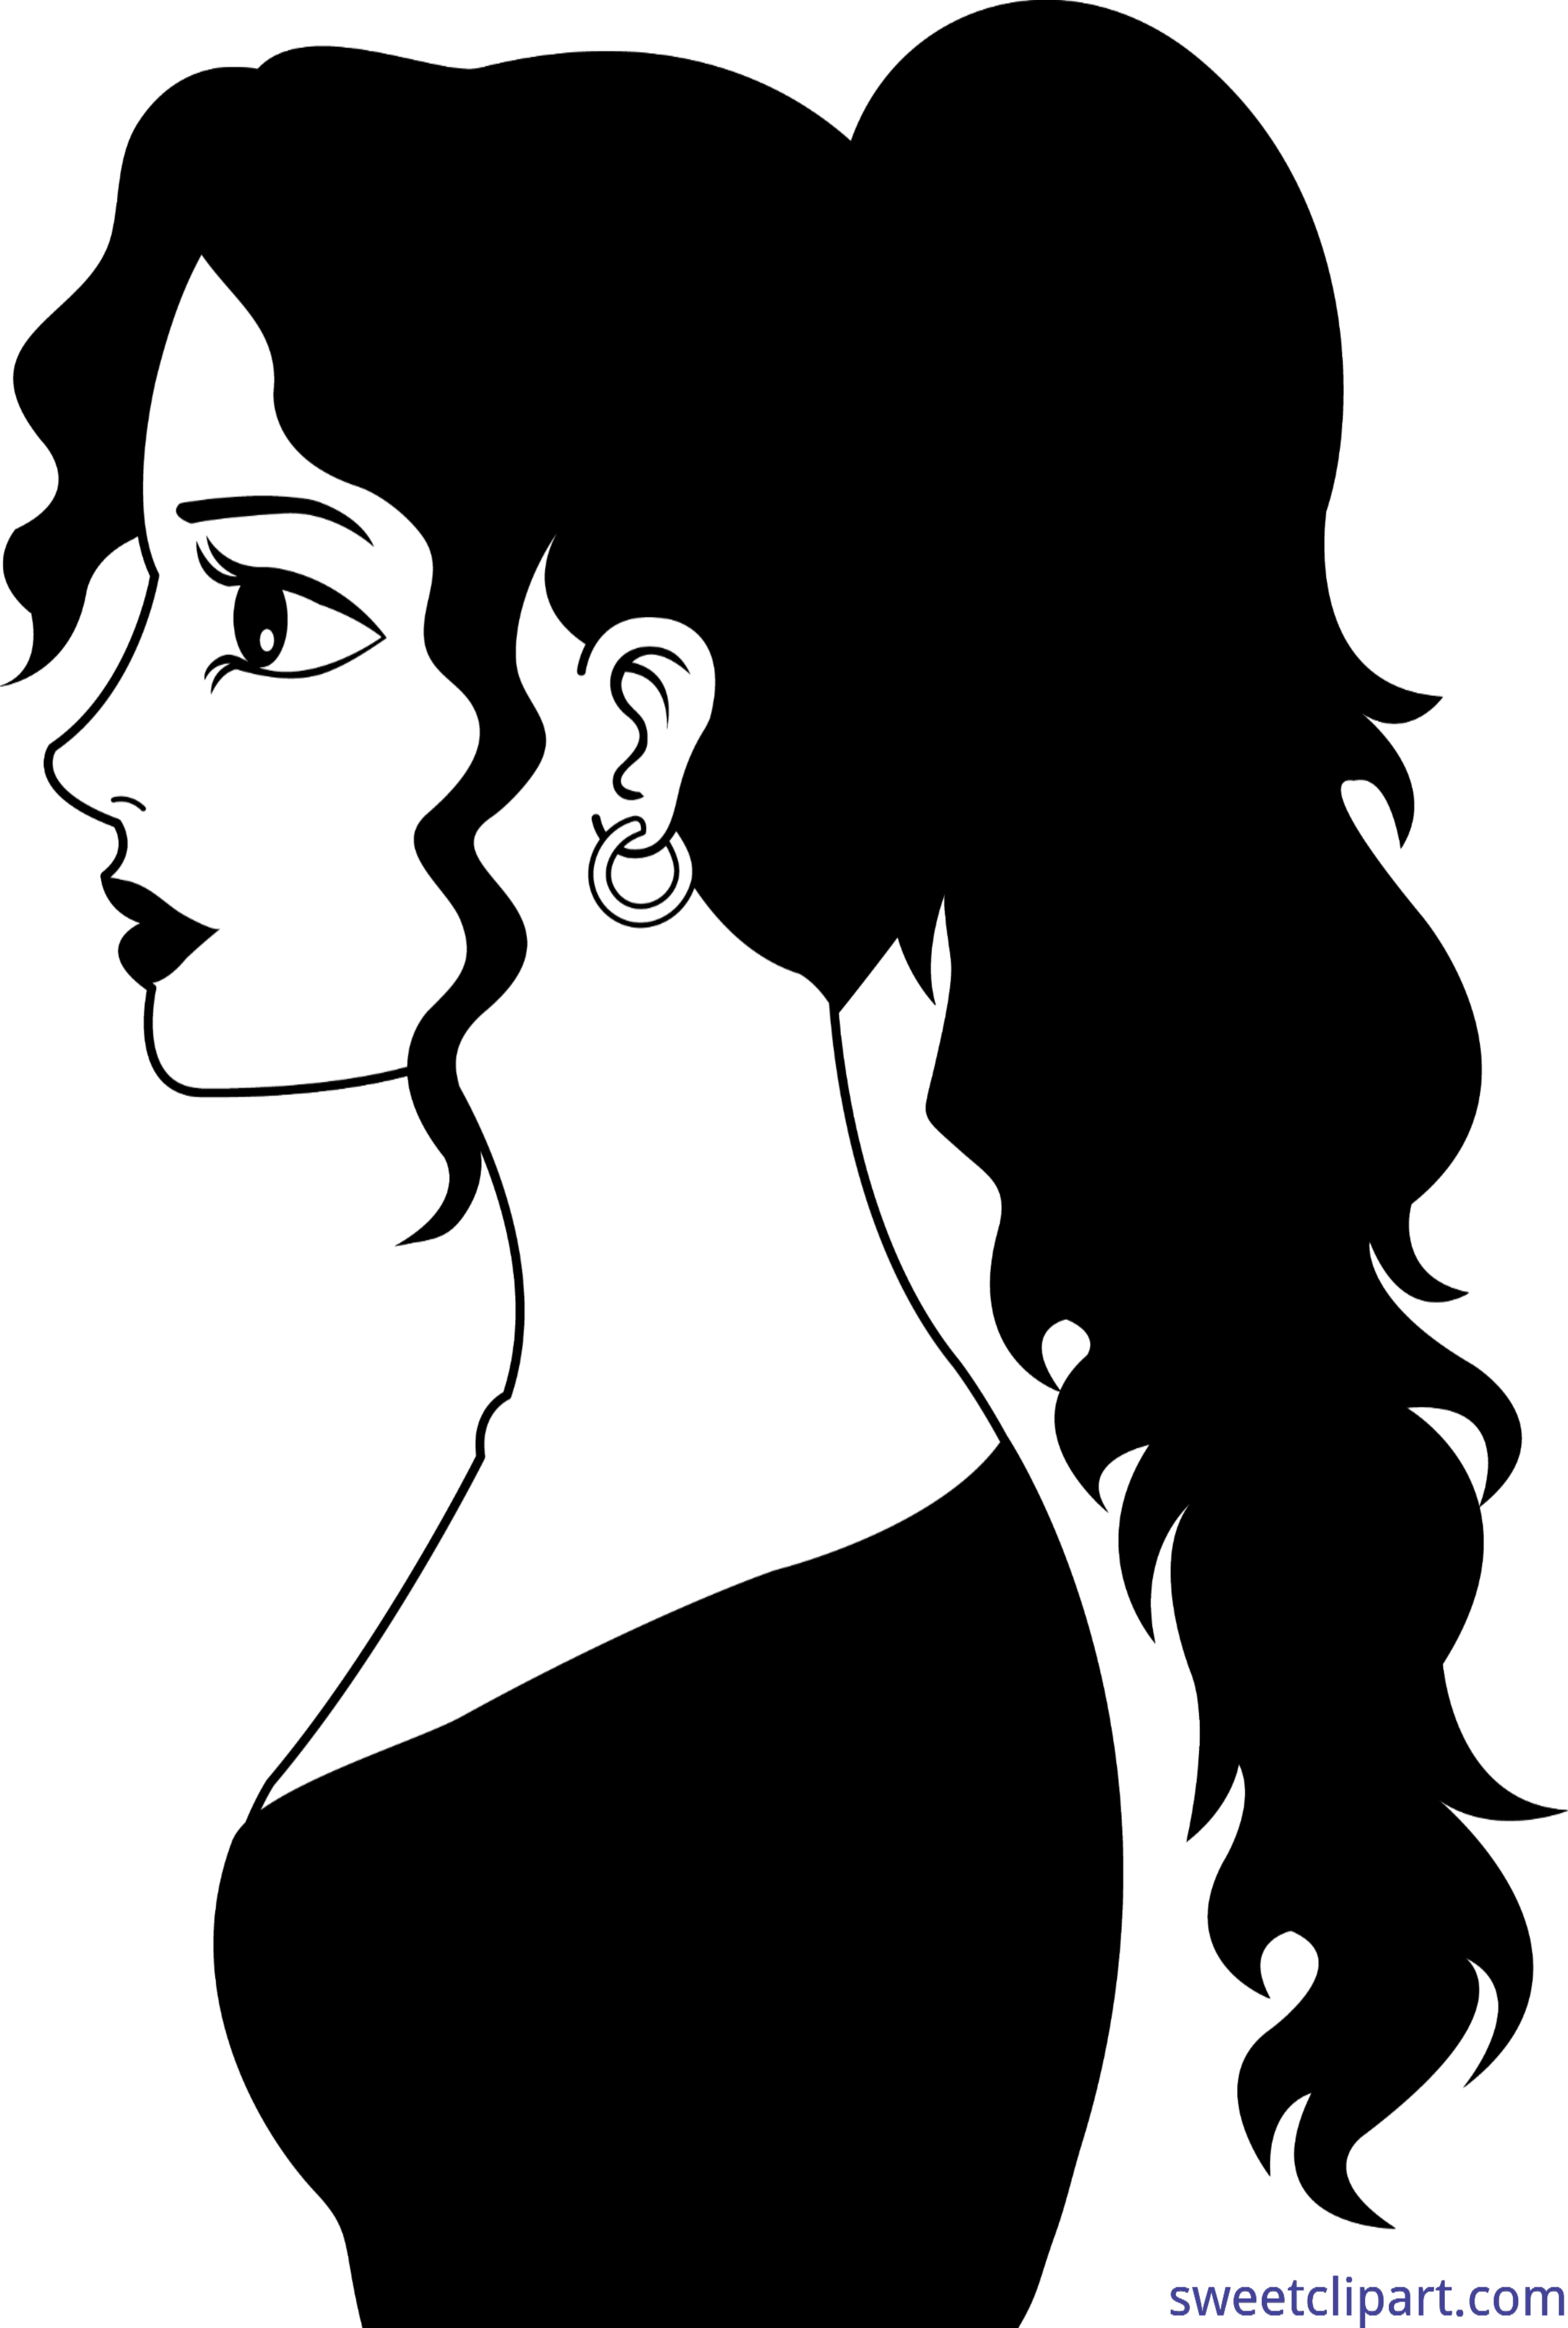 clipart woman black and white